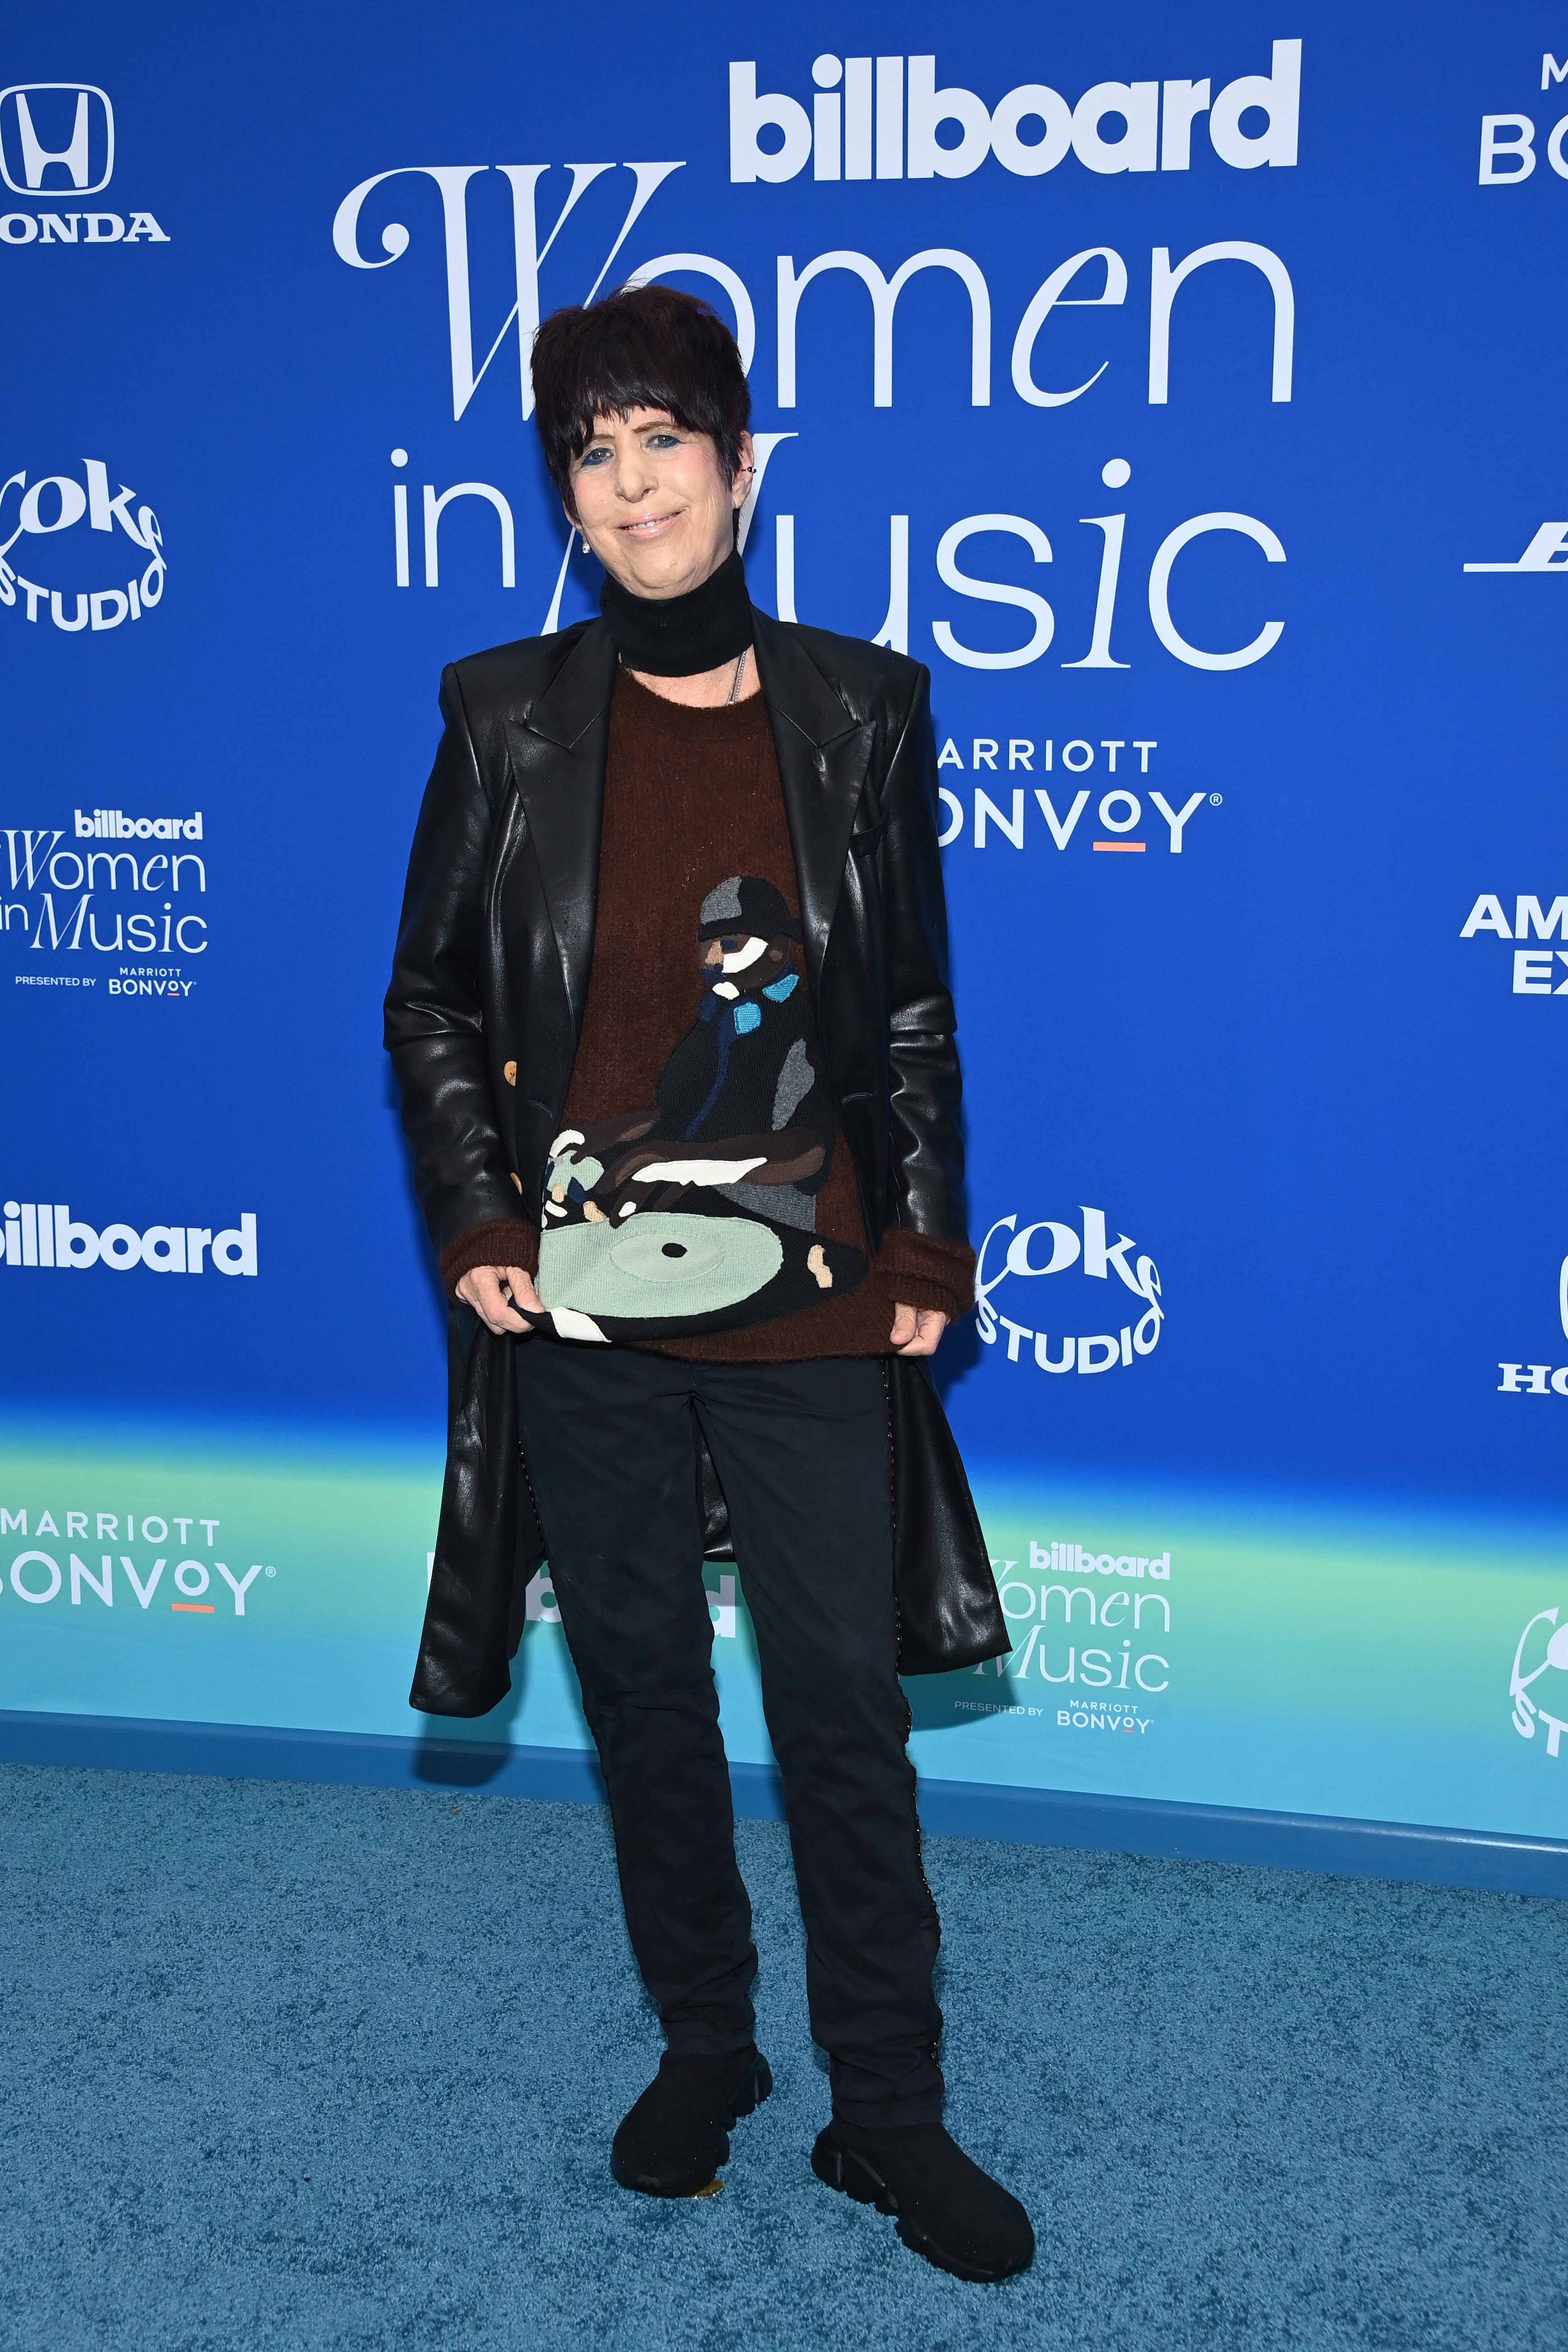 Diane Warren wearing a long leather jacket, pants, chunky boots and a sweater with a DJ design